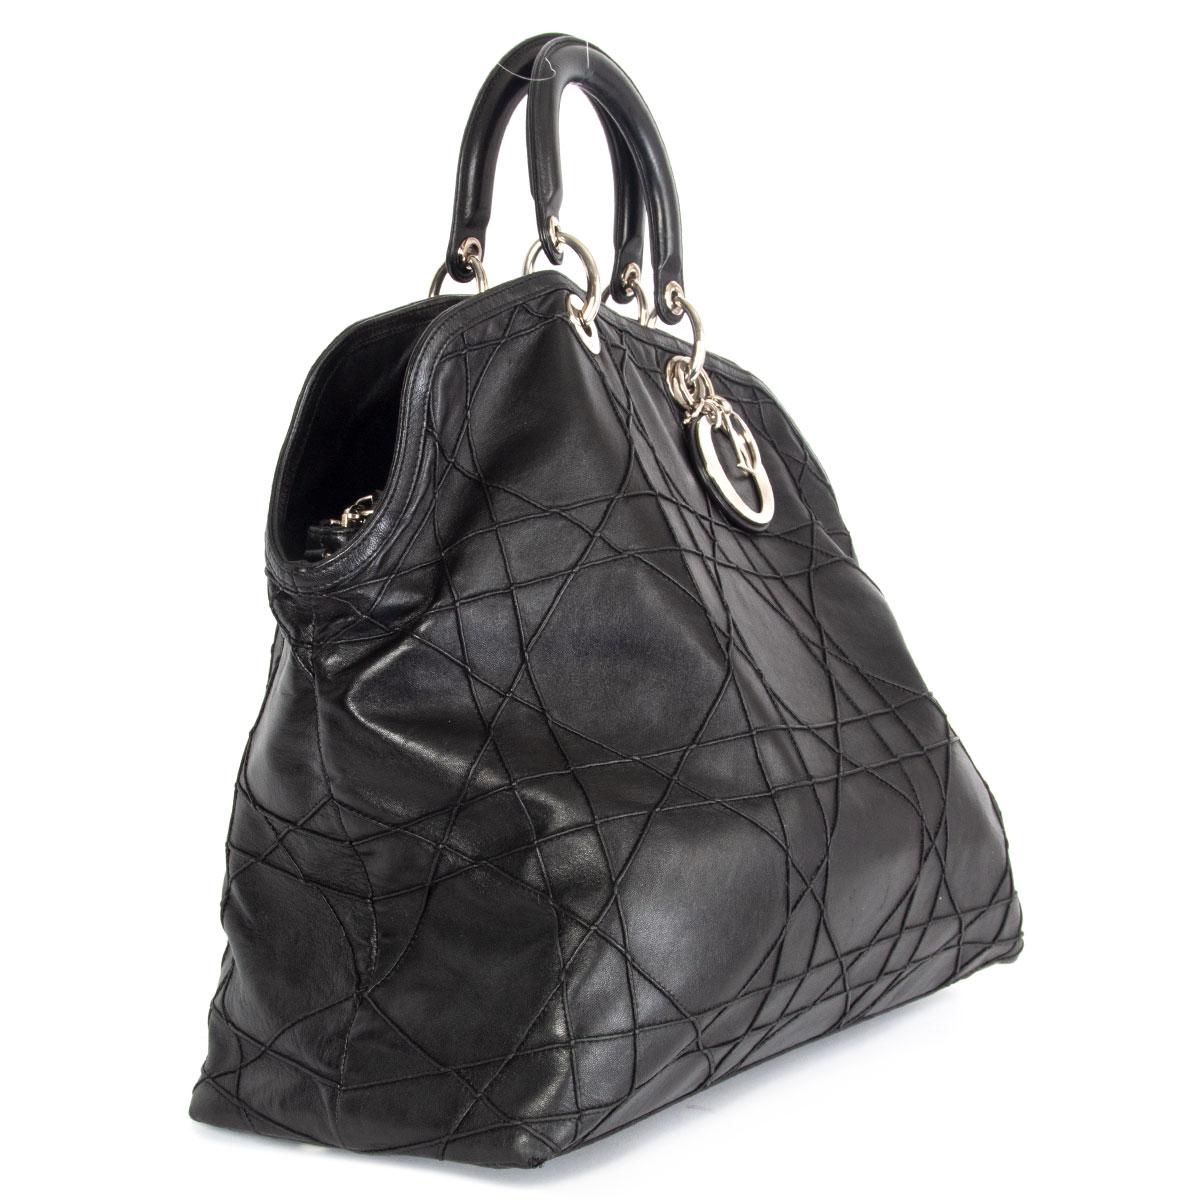 100% authentic Christian Dior Granville tote shoulder bag in black cannage quilted lambskin featuring silver-tone hardware. Divided in three compartments with one big zipper pocket in the middle with a black nylon and lambskin lining. Small zipper